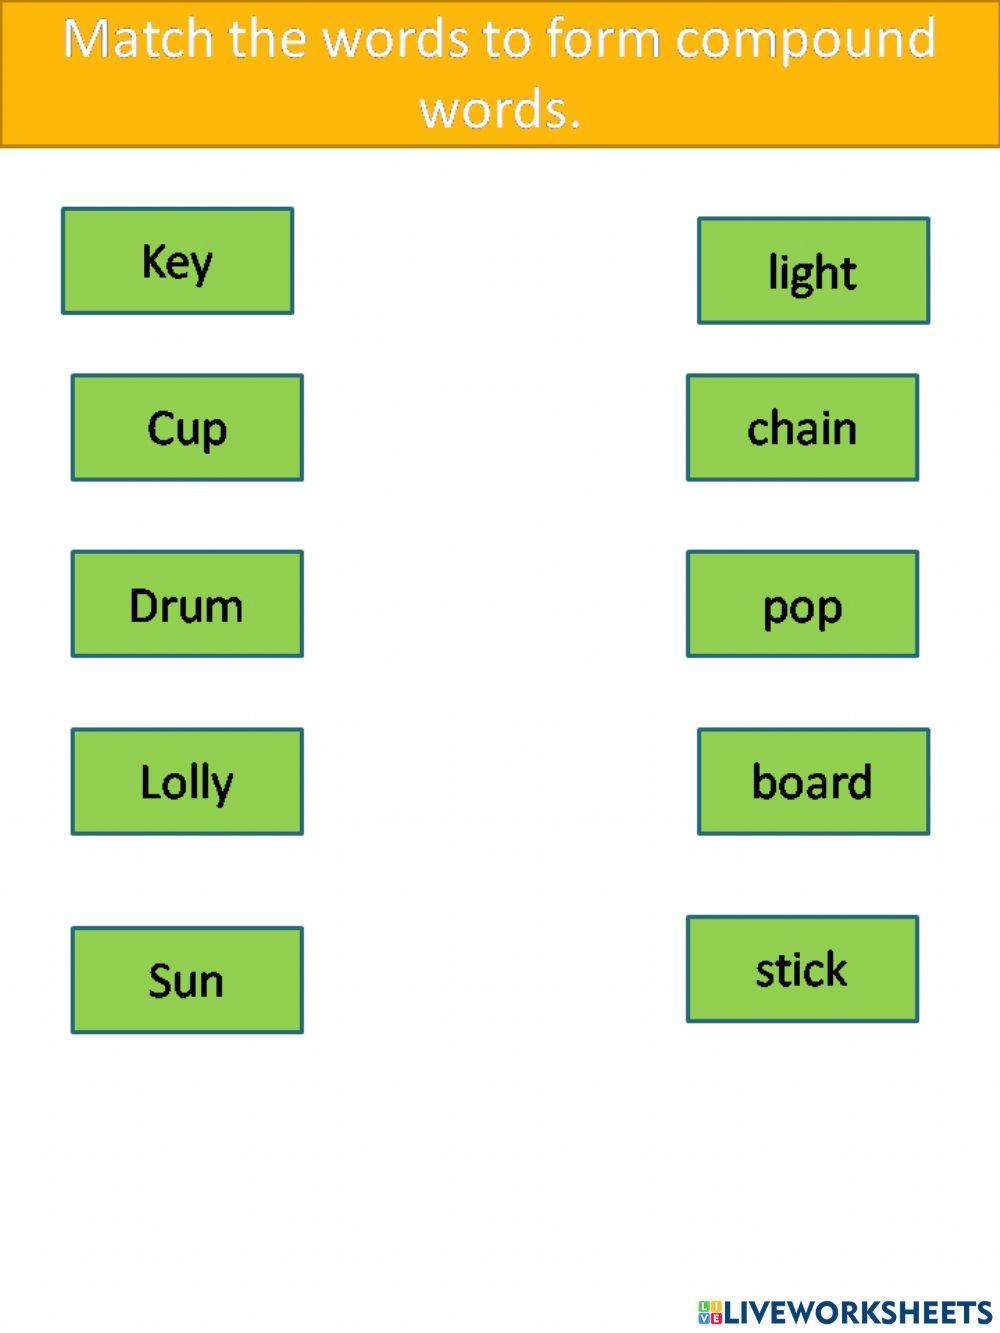 Match the words to form compound words